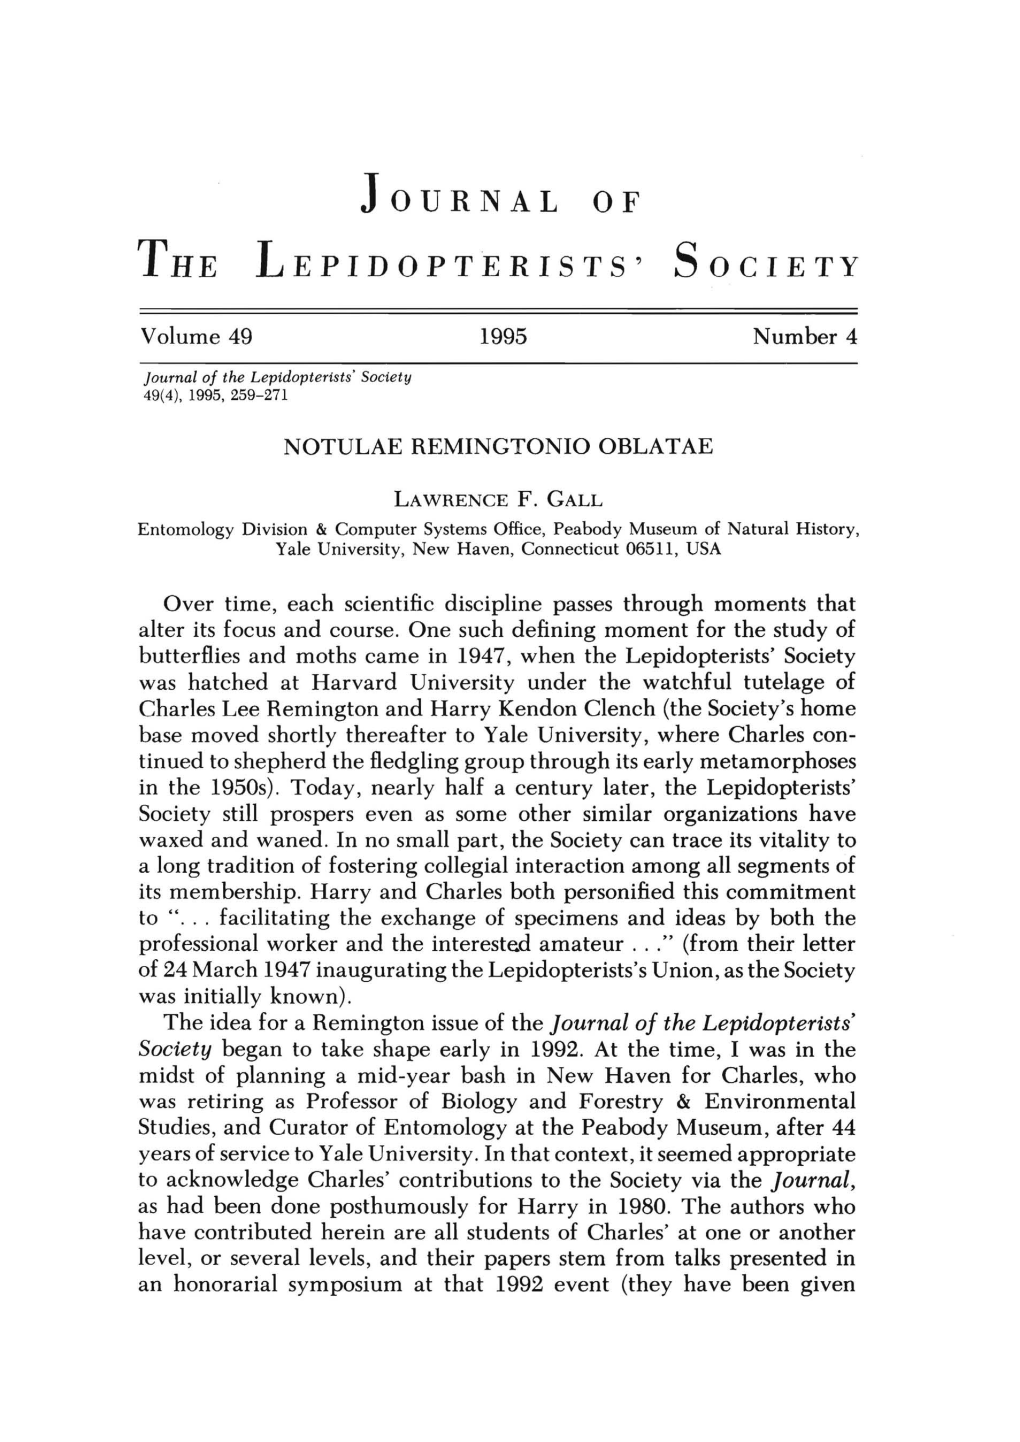 Journal of the Lepidopterists' Society 49(4), 1995, 259-271